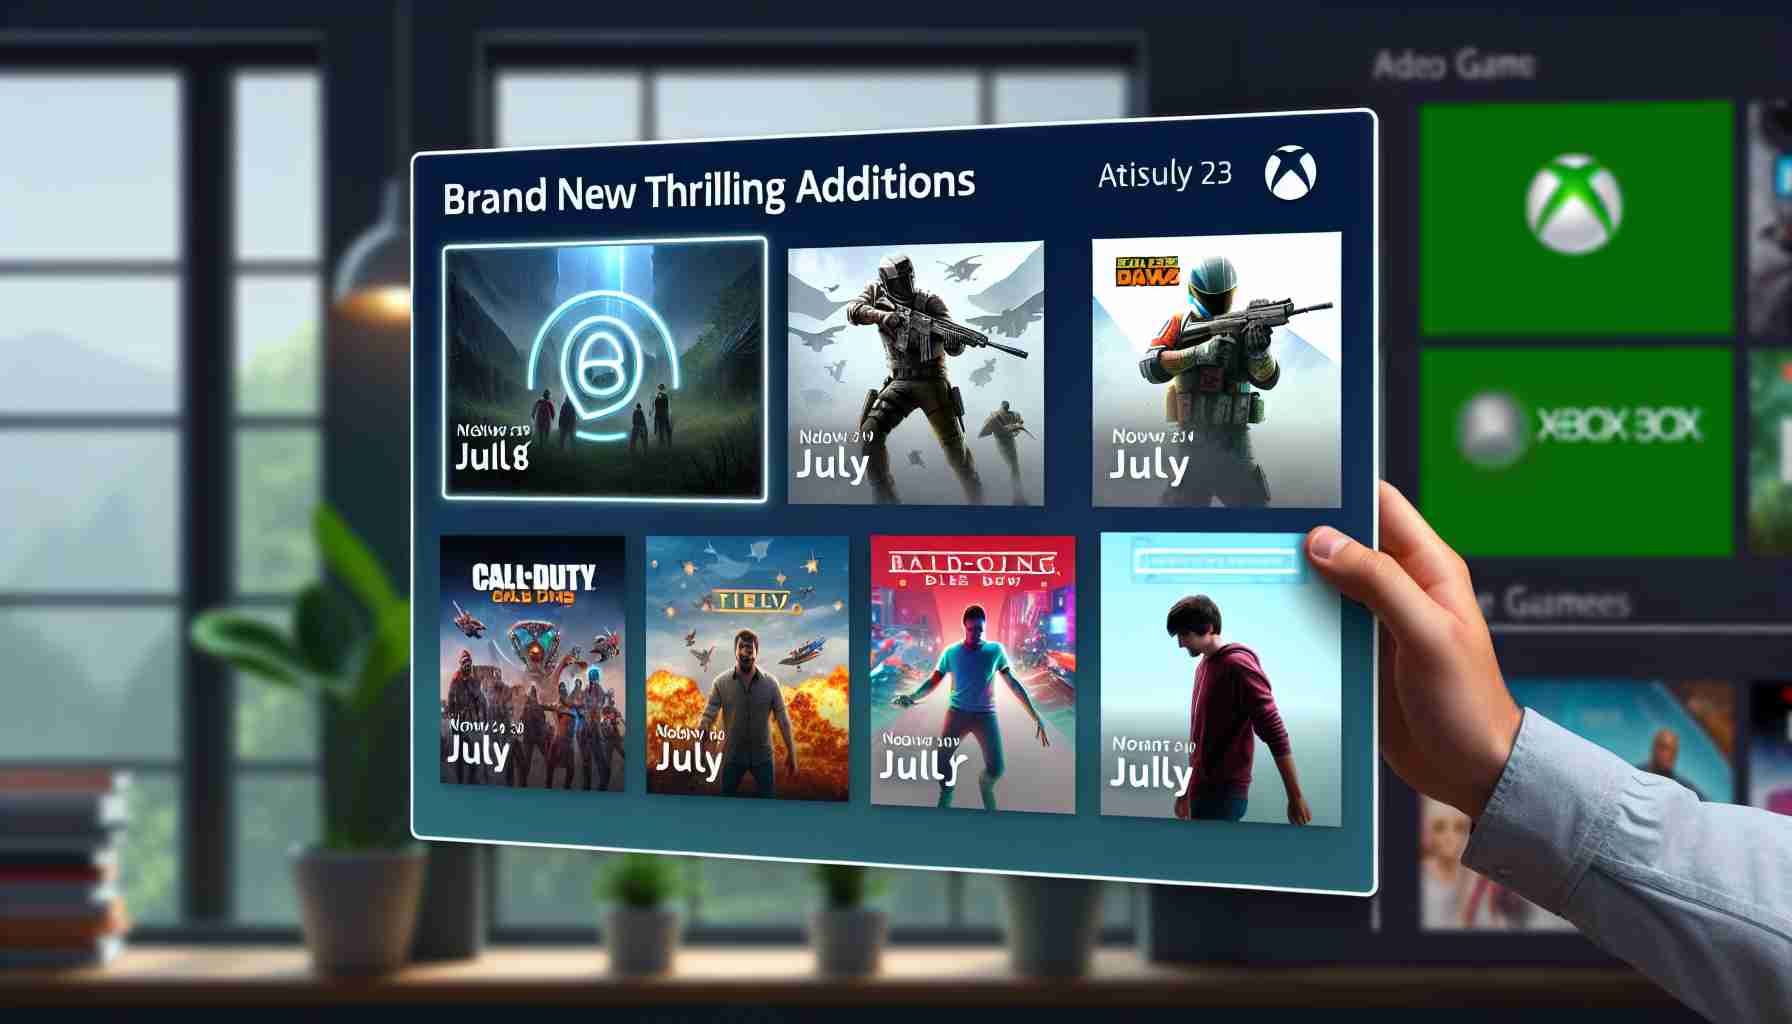 A high-definition mockup of a series of brand new, thrilling addition announcements for the month of July on a platform where you can play a variety of different video games, similar to Xbox Game Pass. The image should show an interface design showcasing several prominent game covers with their release dates prominently displayed. The addition of these new games is seen as thrilling and exciting, heightening the anticipation for the coming month.